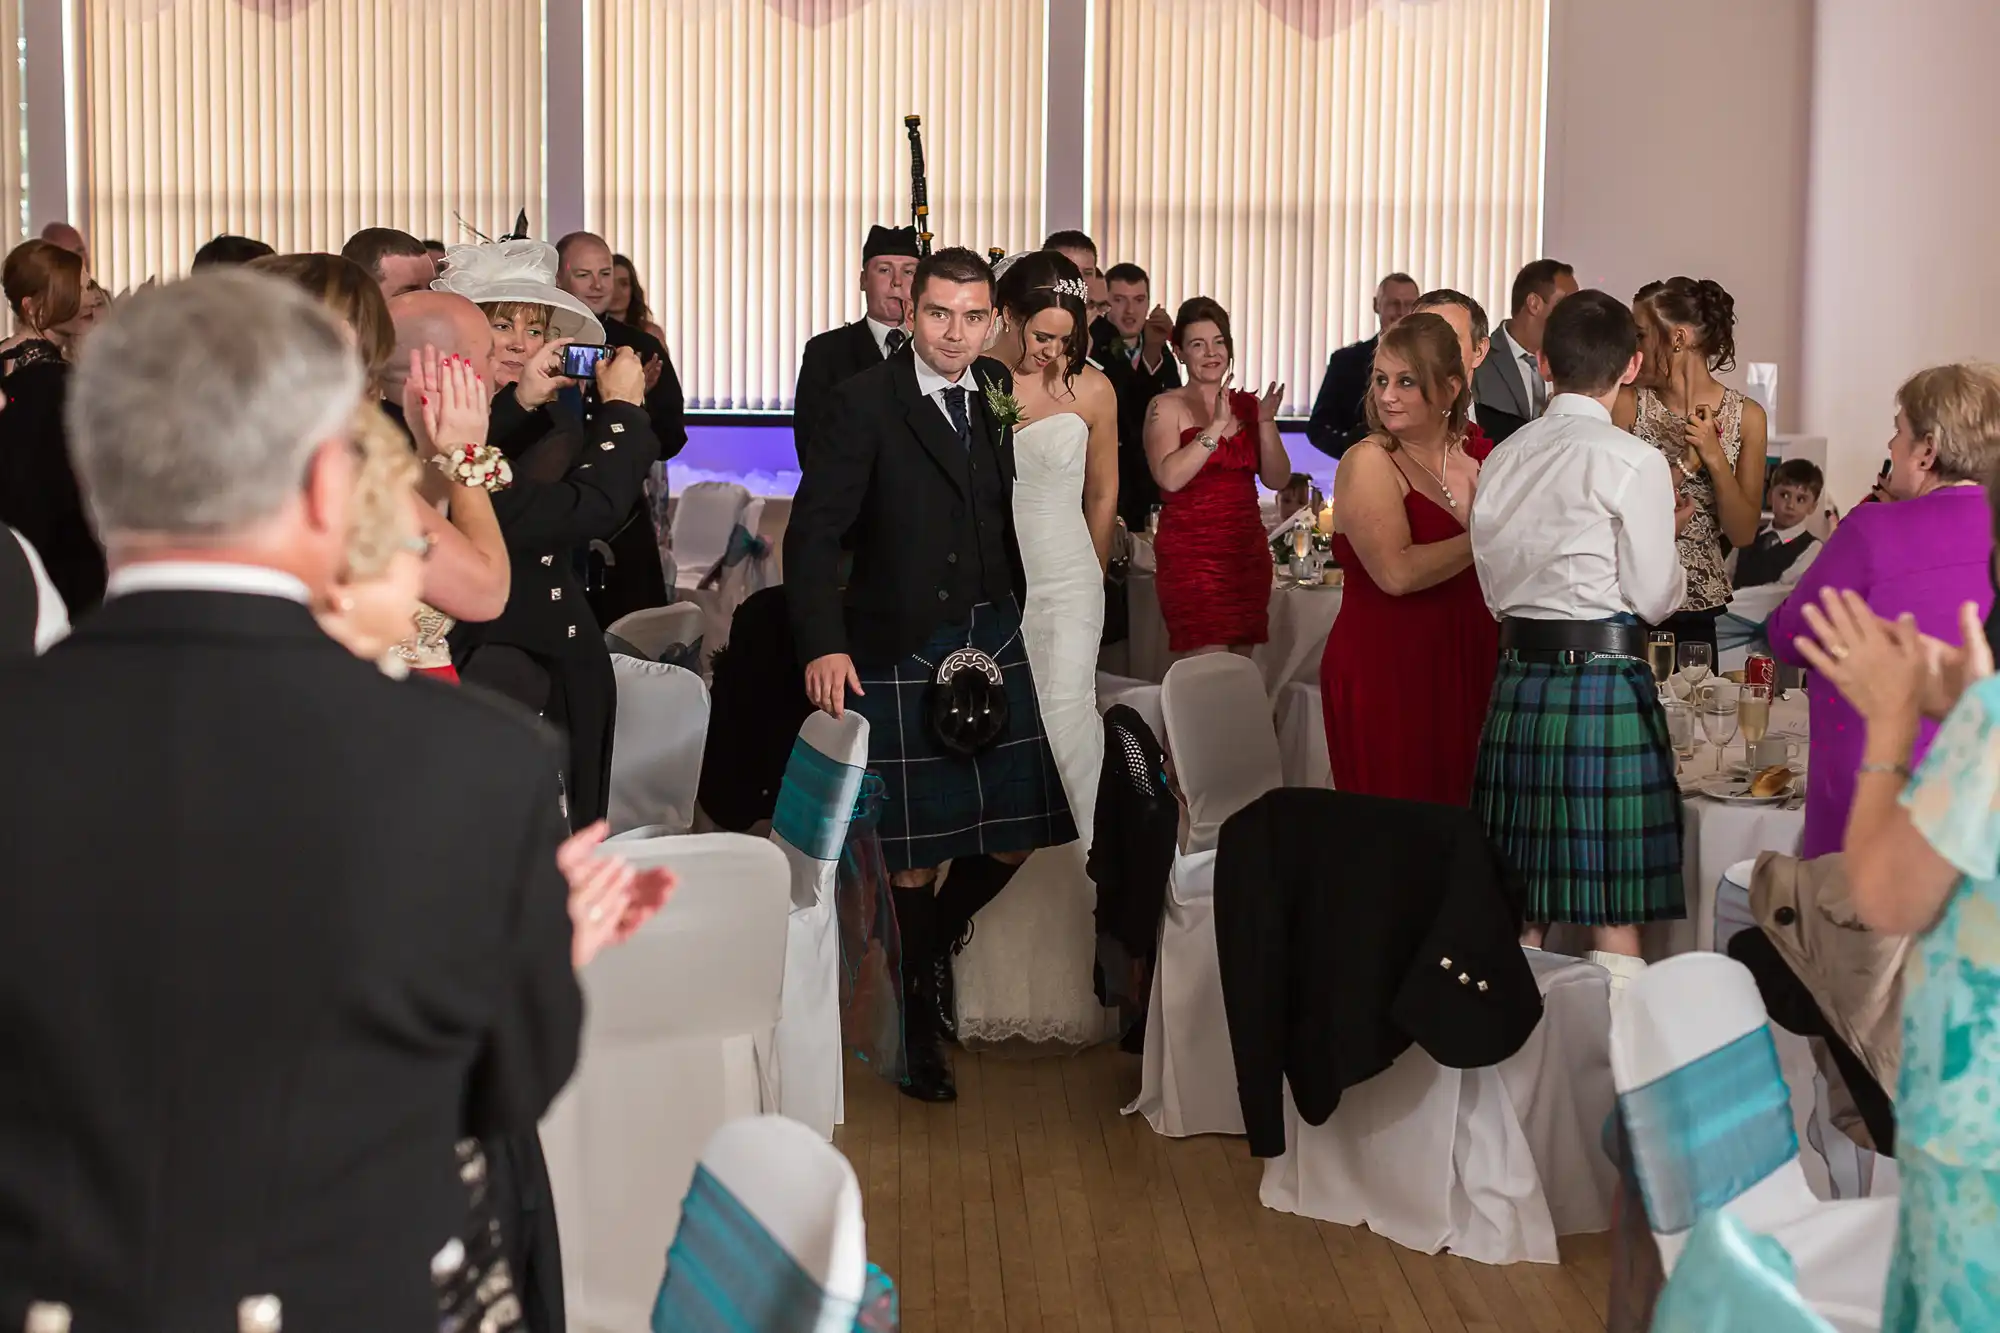 A bride and groom walking through a clapping crowd at a scottish wedding reception, with the groom wearing a kilt.